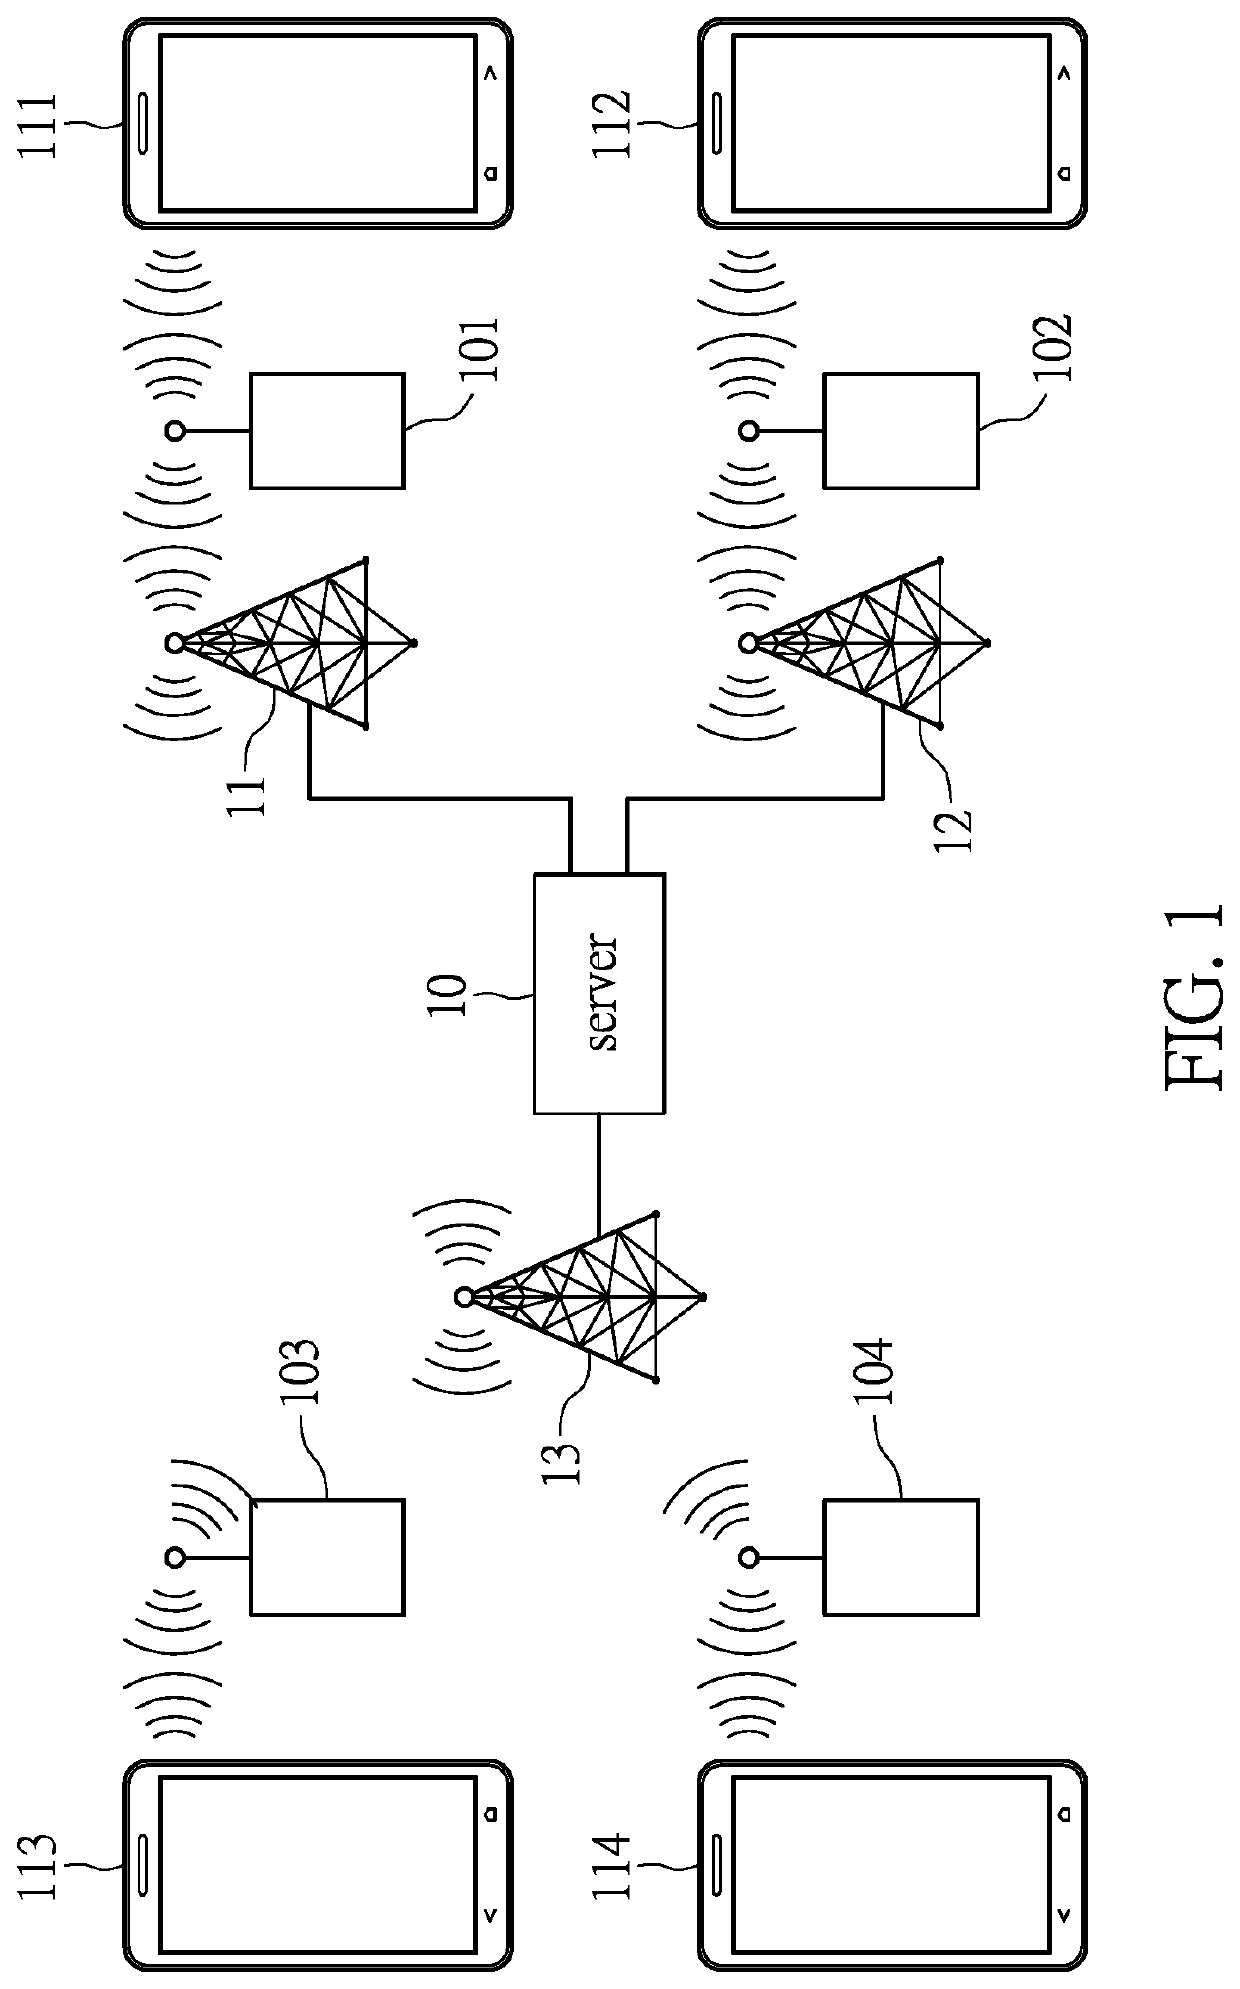 Wireless communication system, communication method and portable transceiver device